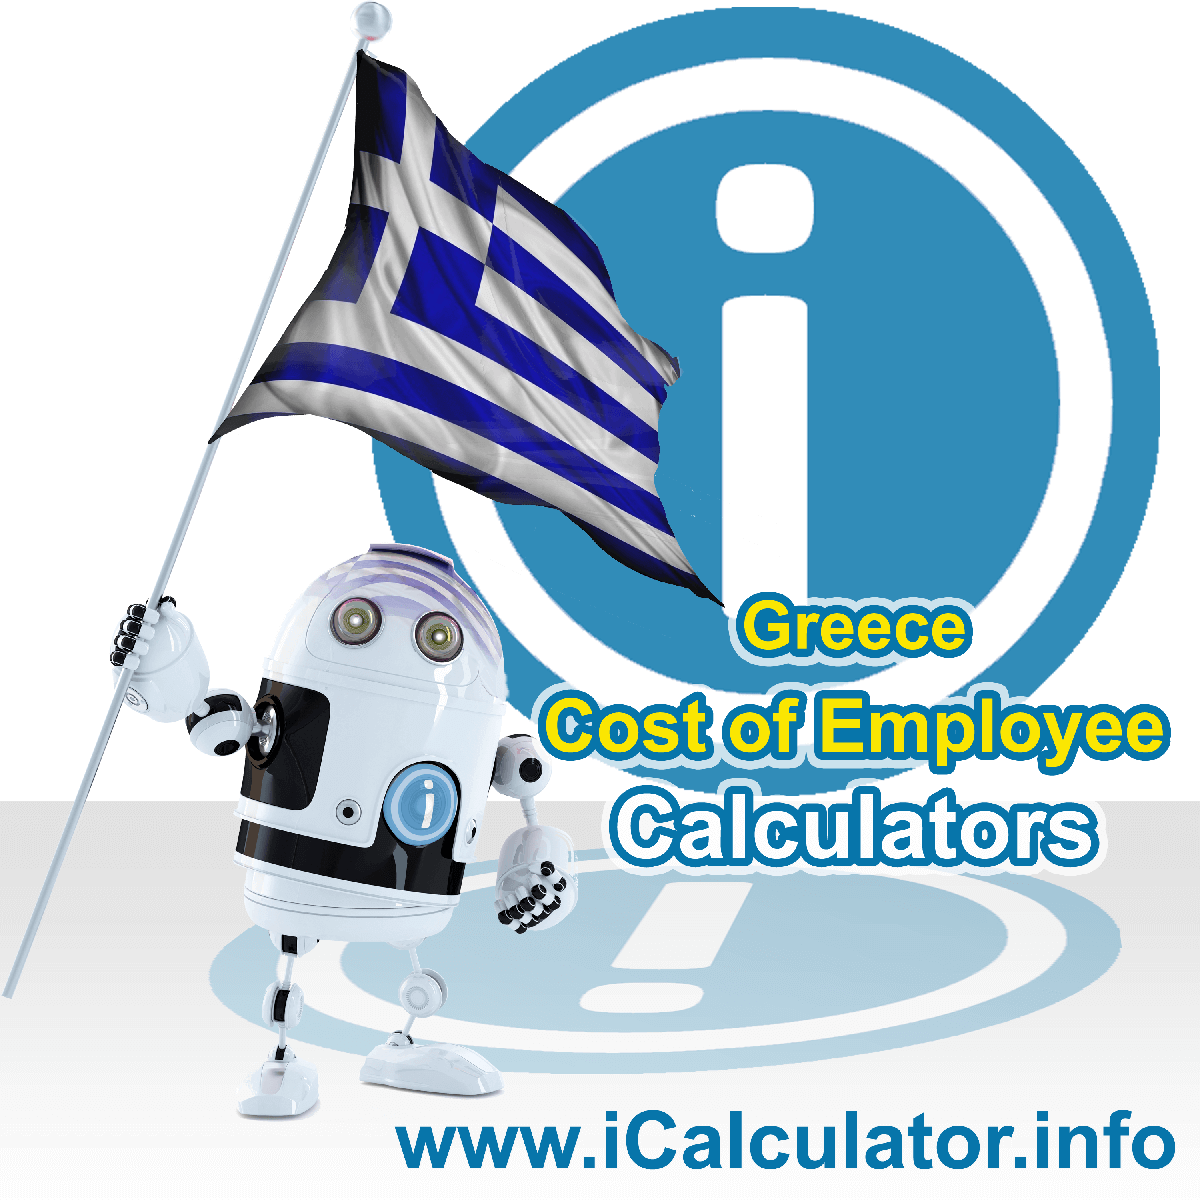 Greece Payroll Calculator. This image shows a new employer in Greece looking at payroll and human resource services in Greece as they want to hire an employee in Greece but are not sure of the employment costs. So, they make use of the Greece payroll calculator to understand their employment cost in Greece in 2023